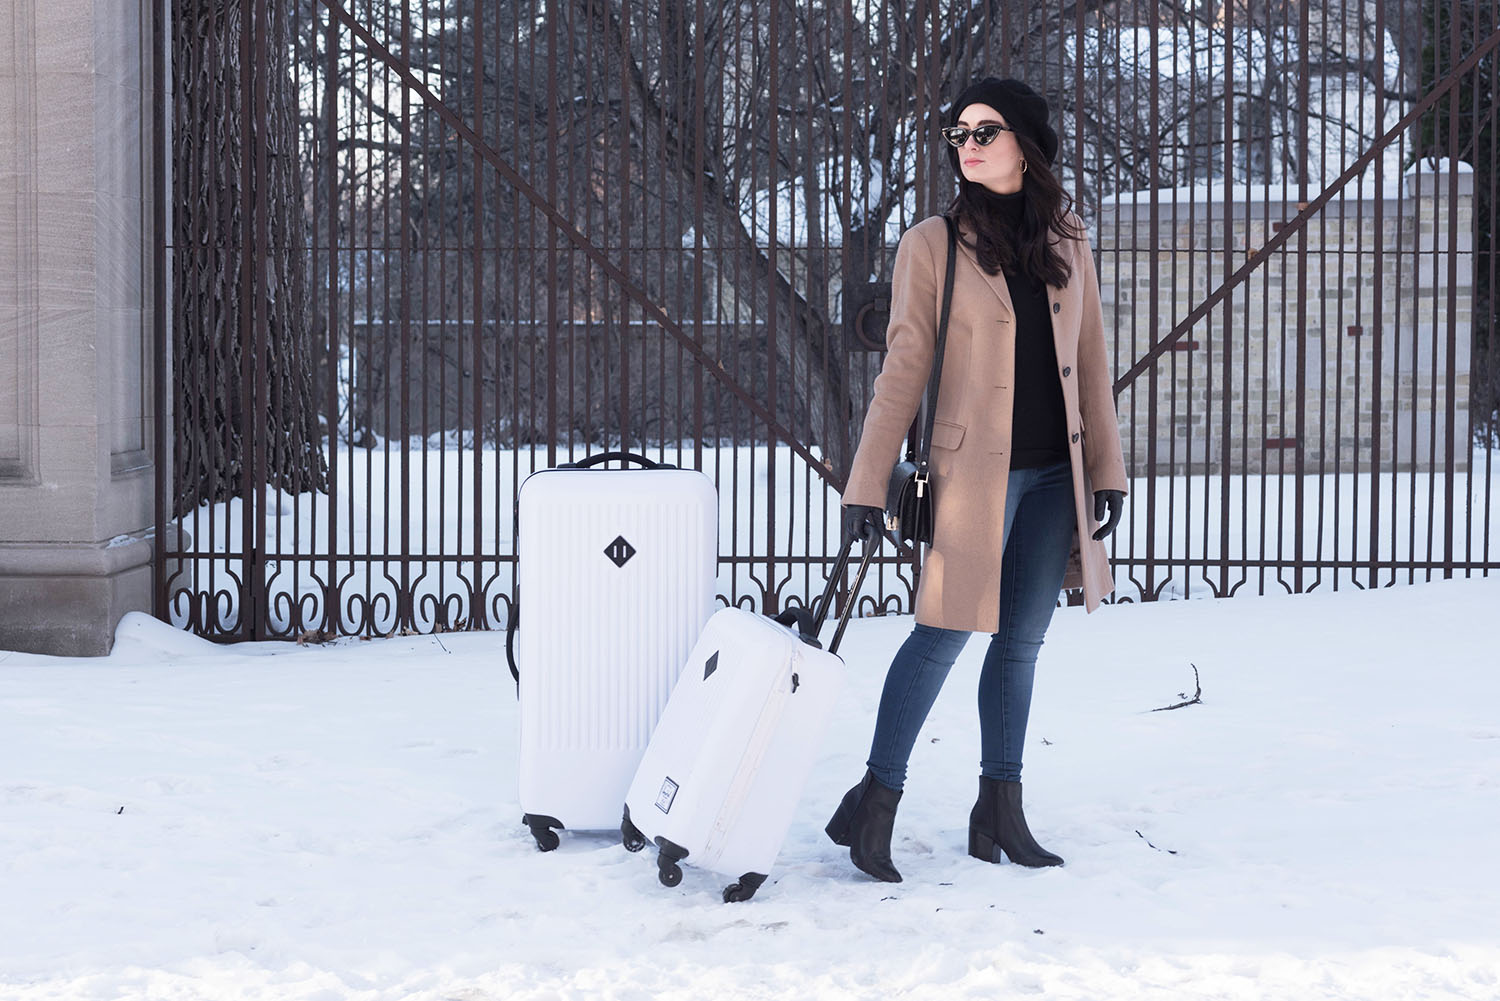 Winnipeg fashion blogger Cee Fardoe of Coco & Vera pulls her white Herschel Supply Co. suitcase through the snow wearing Aldo leather boots and an Anthropologie Bonnie beret